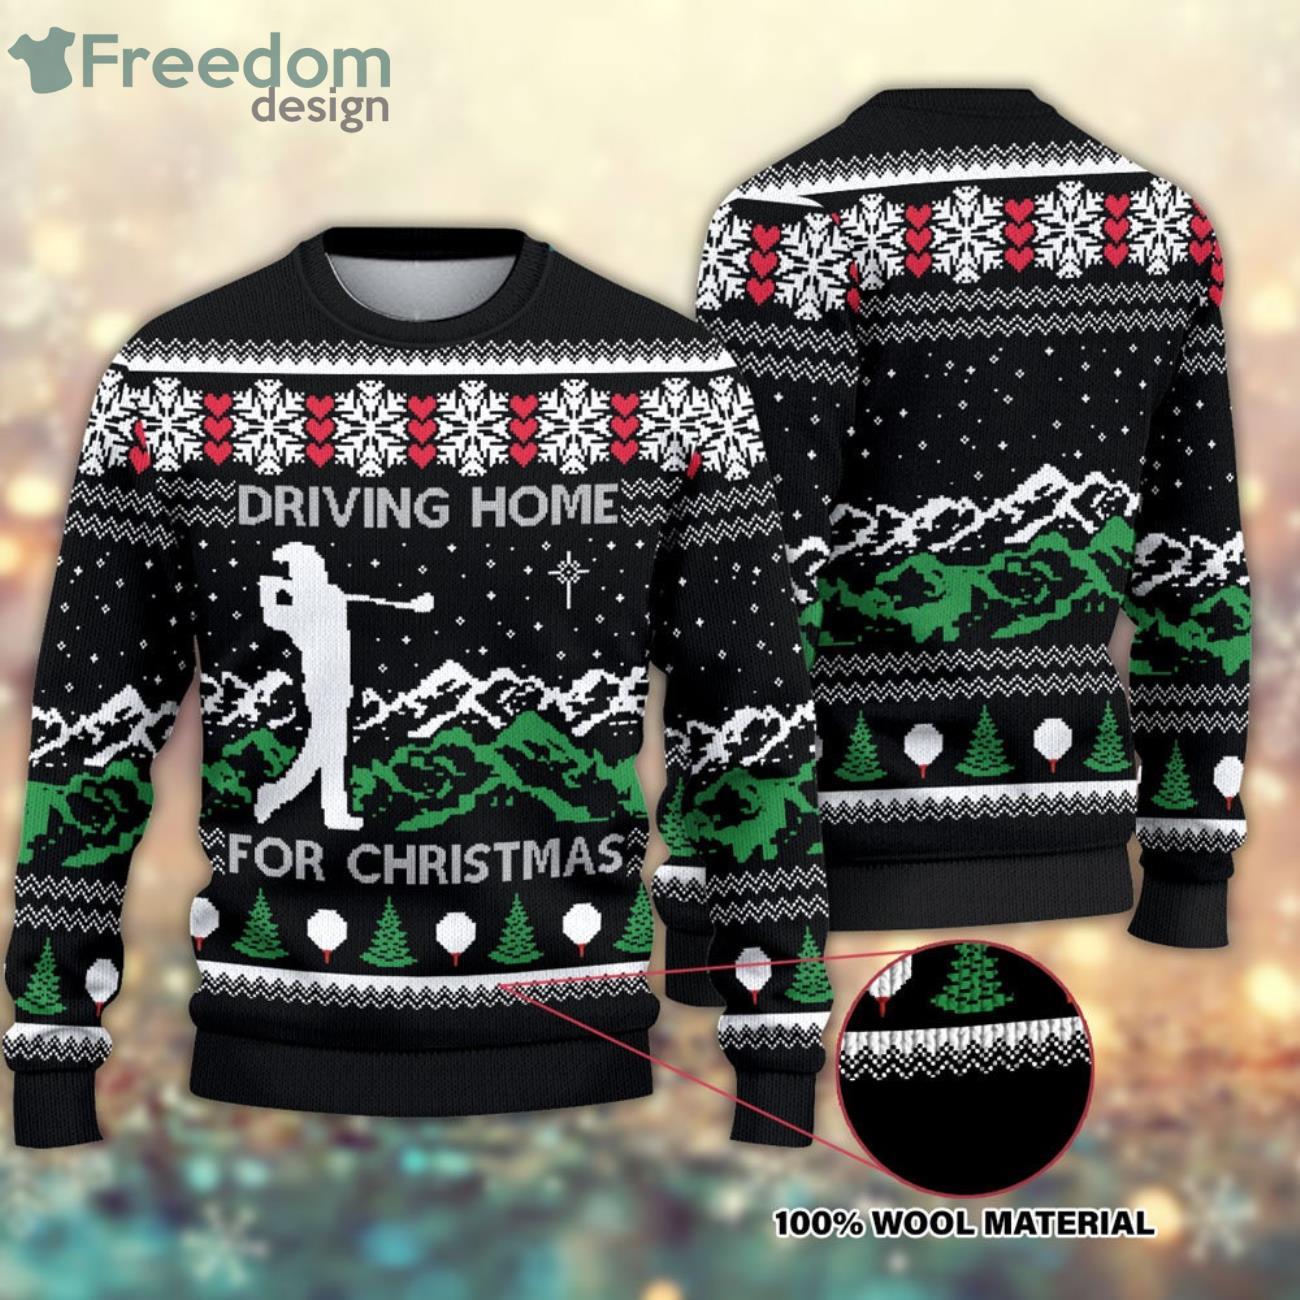 Men's Driving Home For Christmas Christmas Sweater - Europe's largest  selection